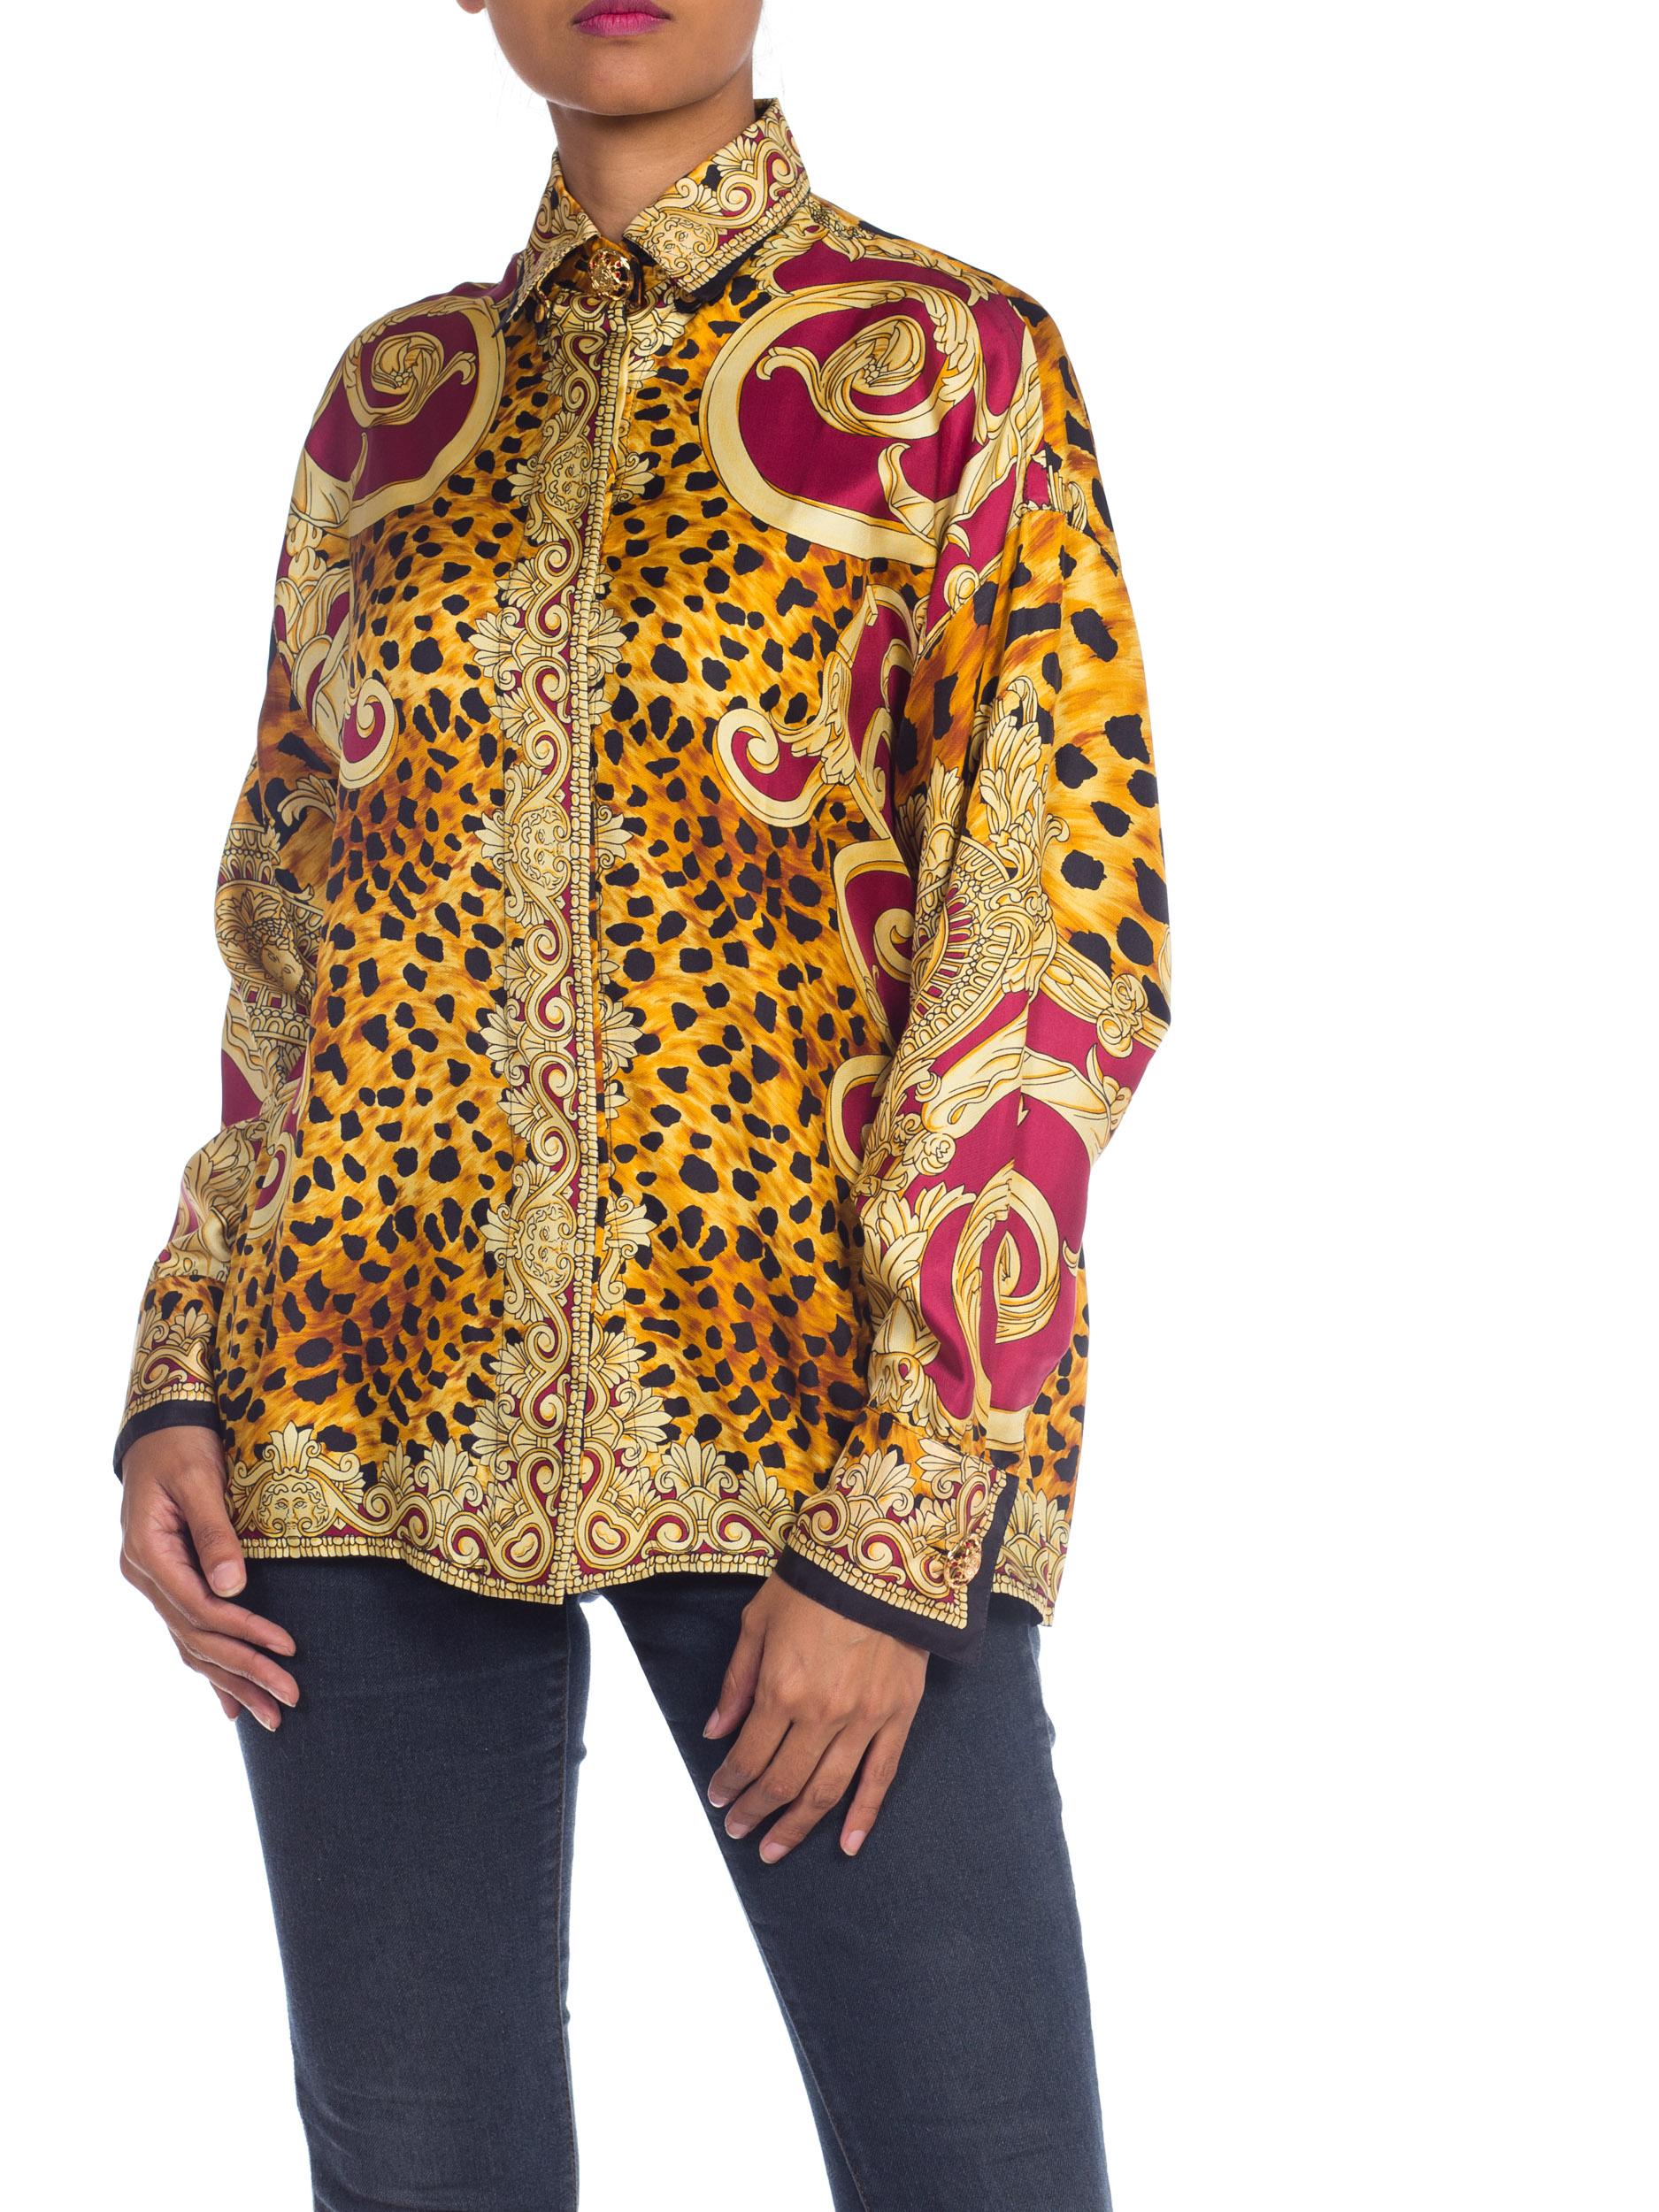 1990S GIANNI VERSACE Gold Baroque & Leopard Silk Shirt With Crystals Buttons 7